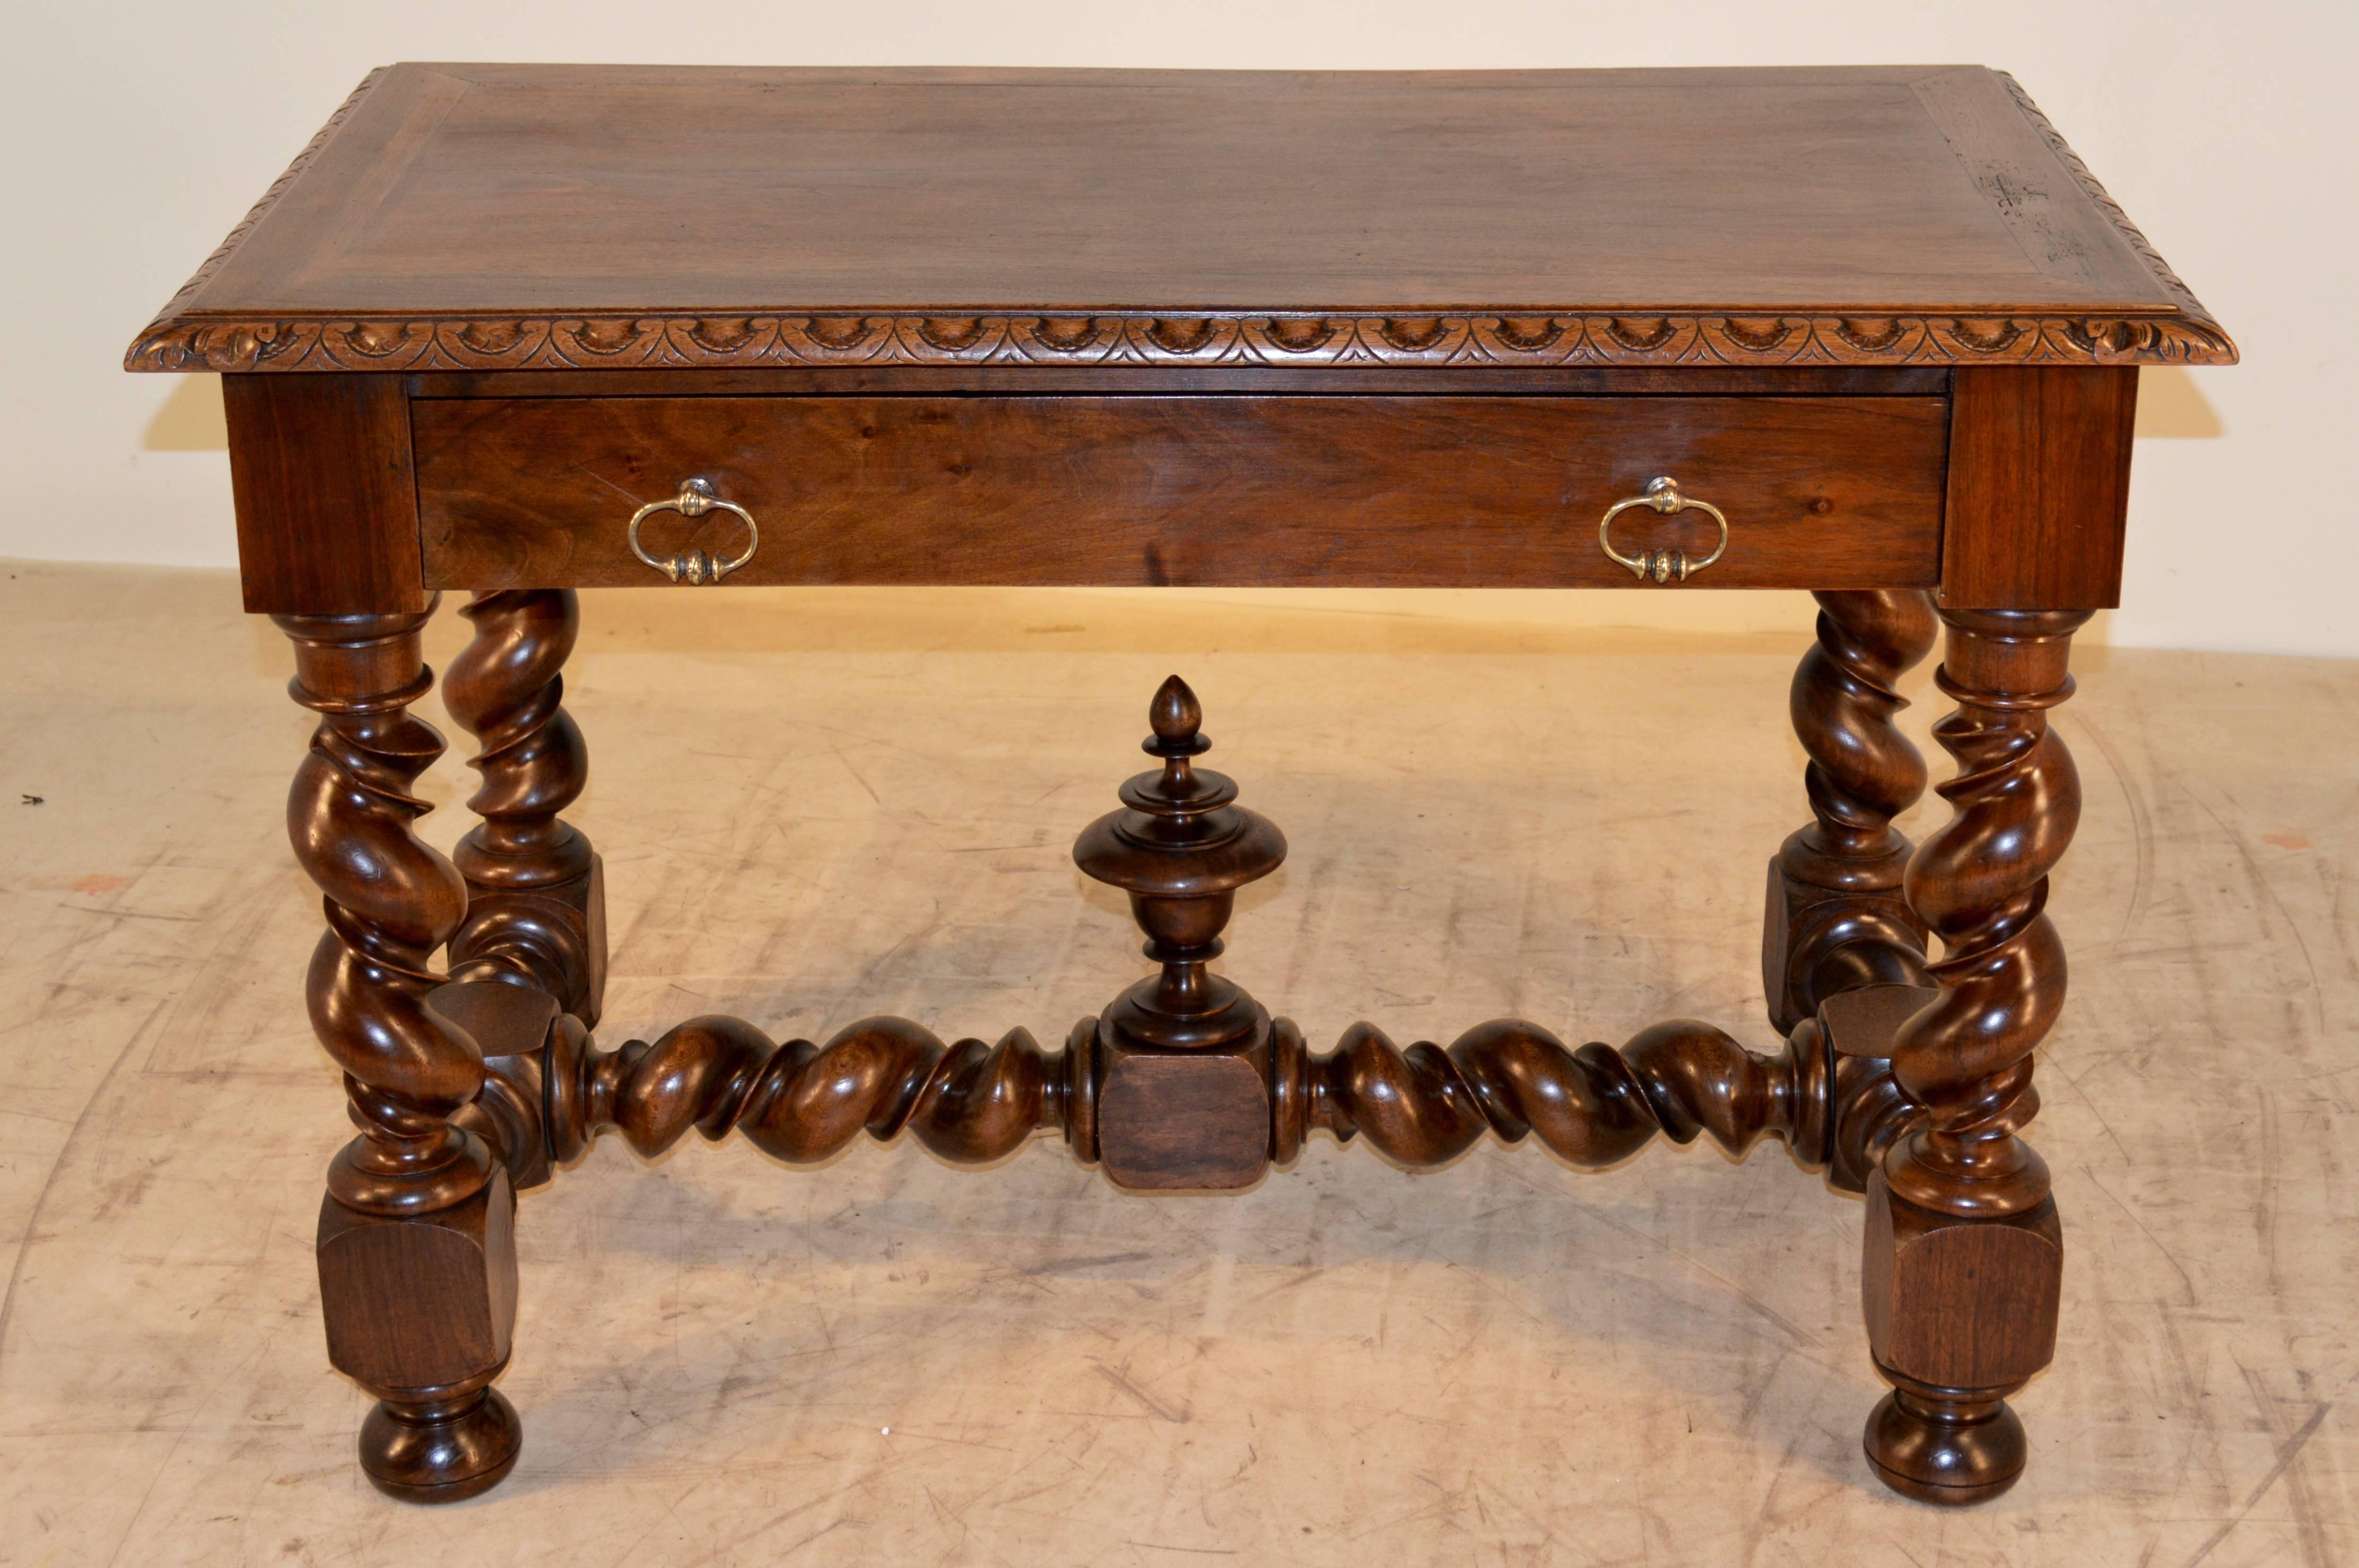 19th century French walnut side table. Banded wood top with a beveled and carved decorated edge. Single drawer in the front, and is supported on hand-turned vine twist legs with matching stretchers, finished with a lovely finial. Age wear and